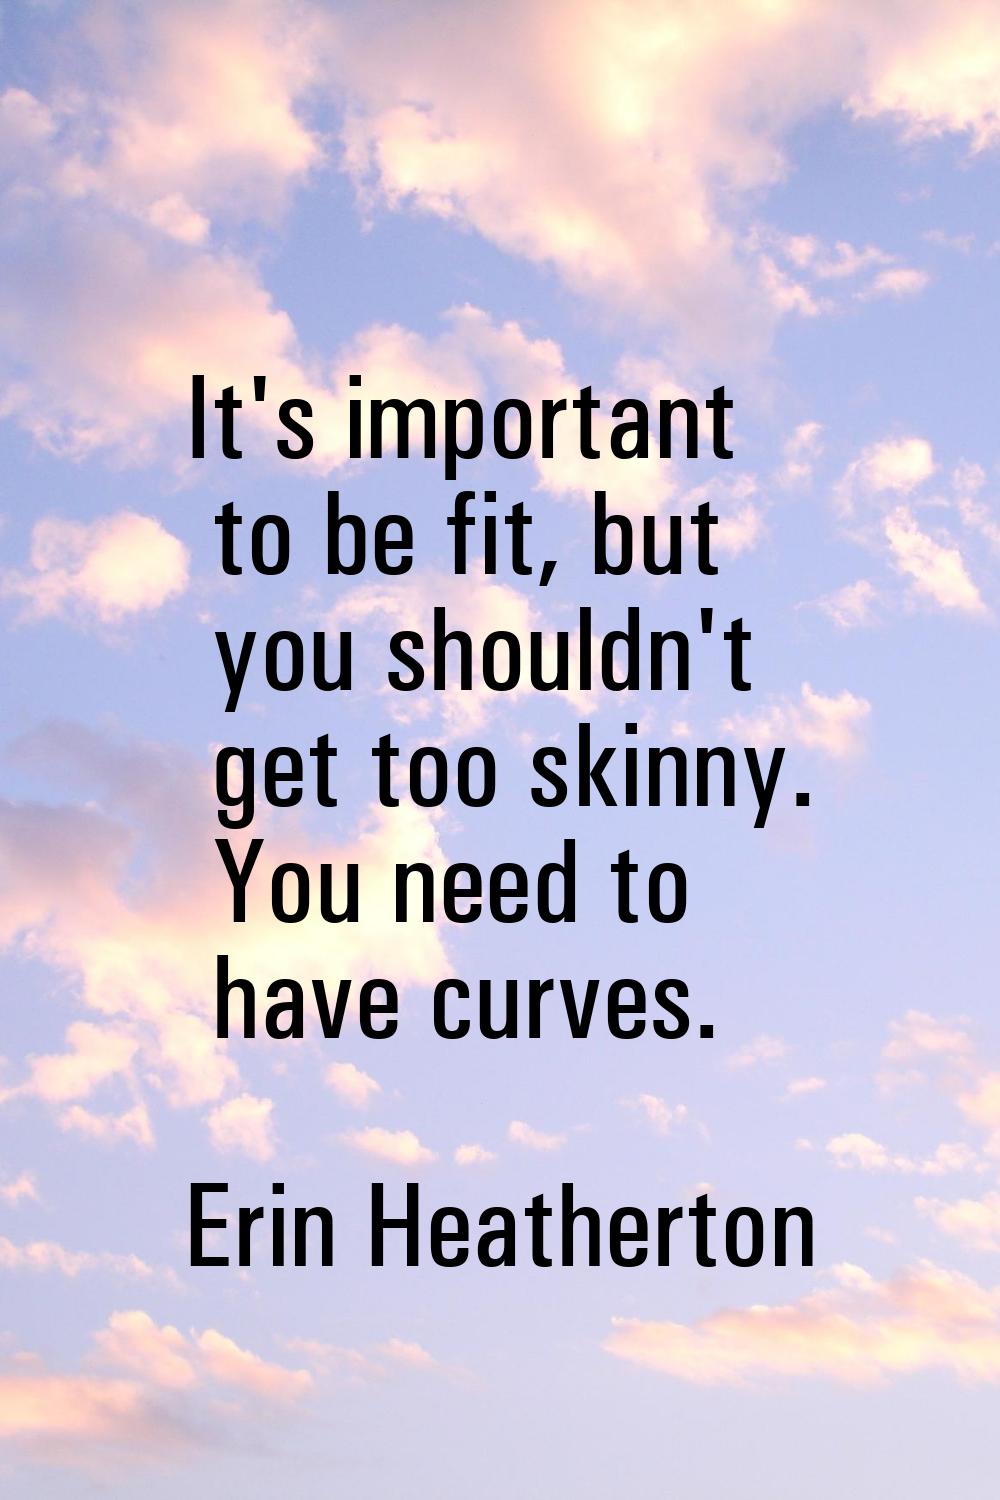 It's important to be fit, but you shouldn't get too skinny. You need to have curves.